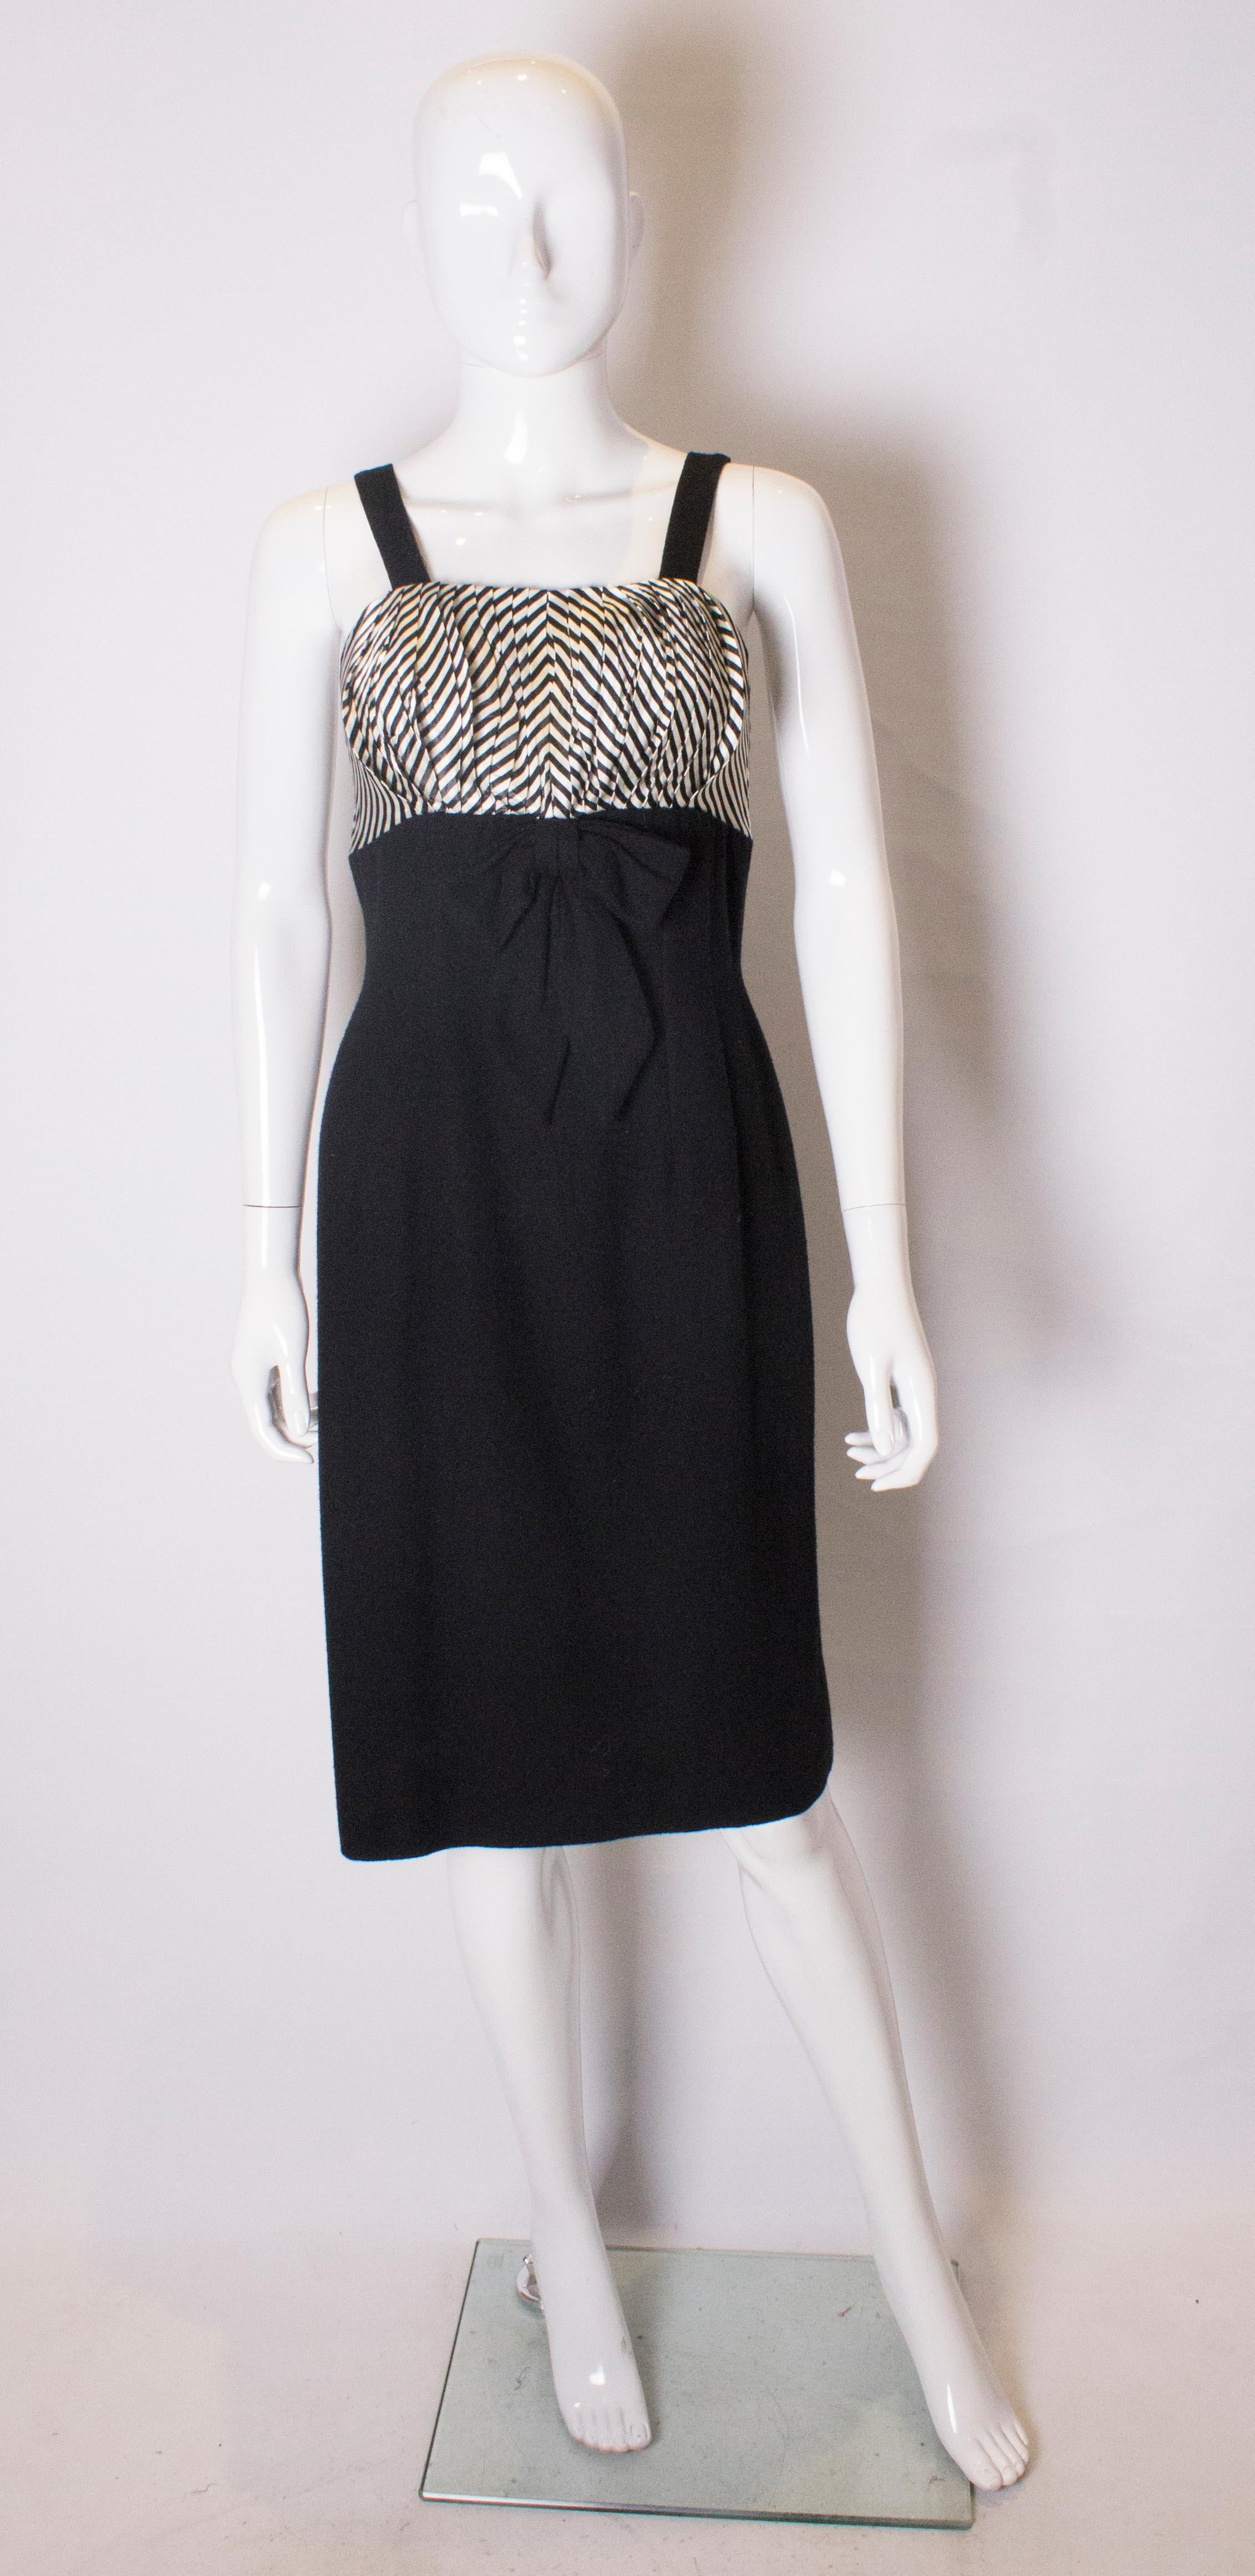 A chic vintage cocktail dress in black and white. The dress has a black body , and black and white bodice. It has a central back zip , and the bust area is lined.